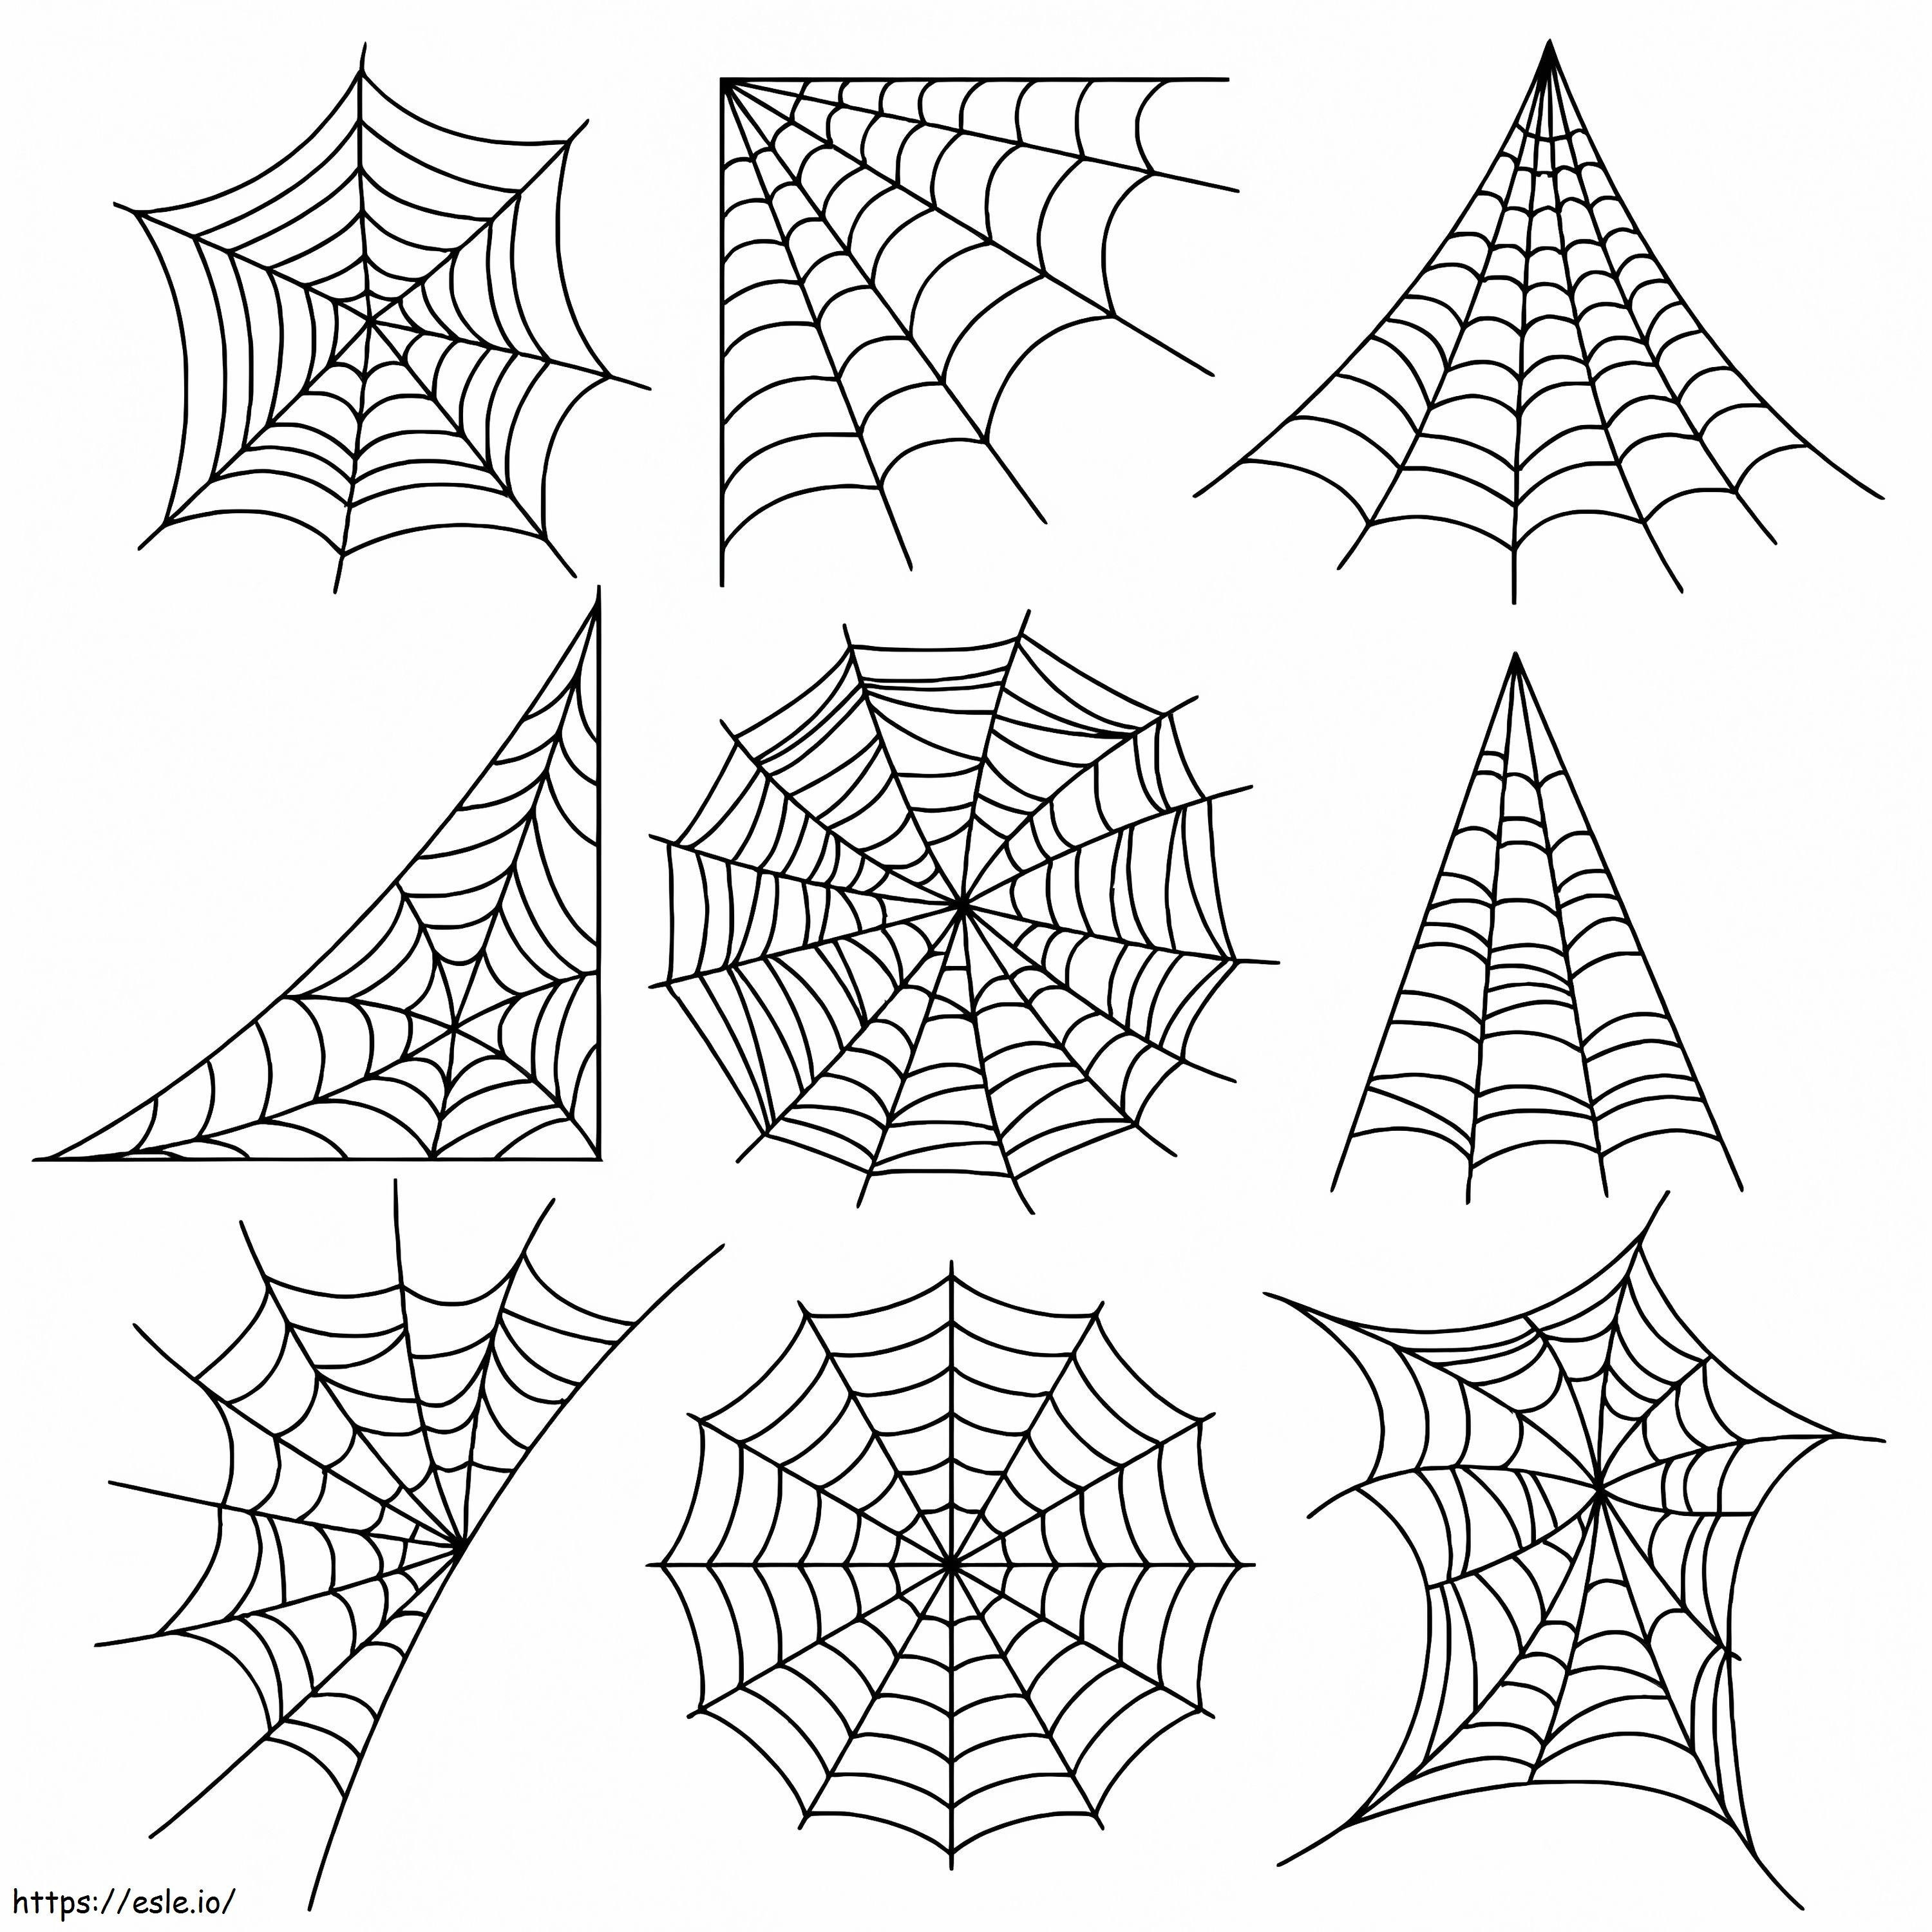 Spider Webs coloring page